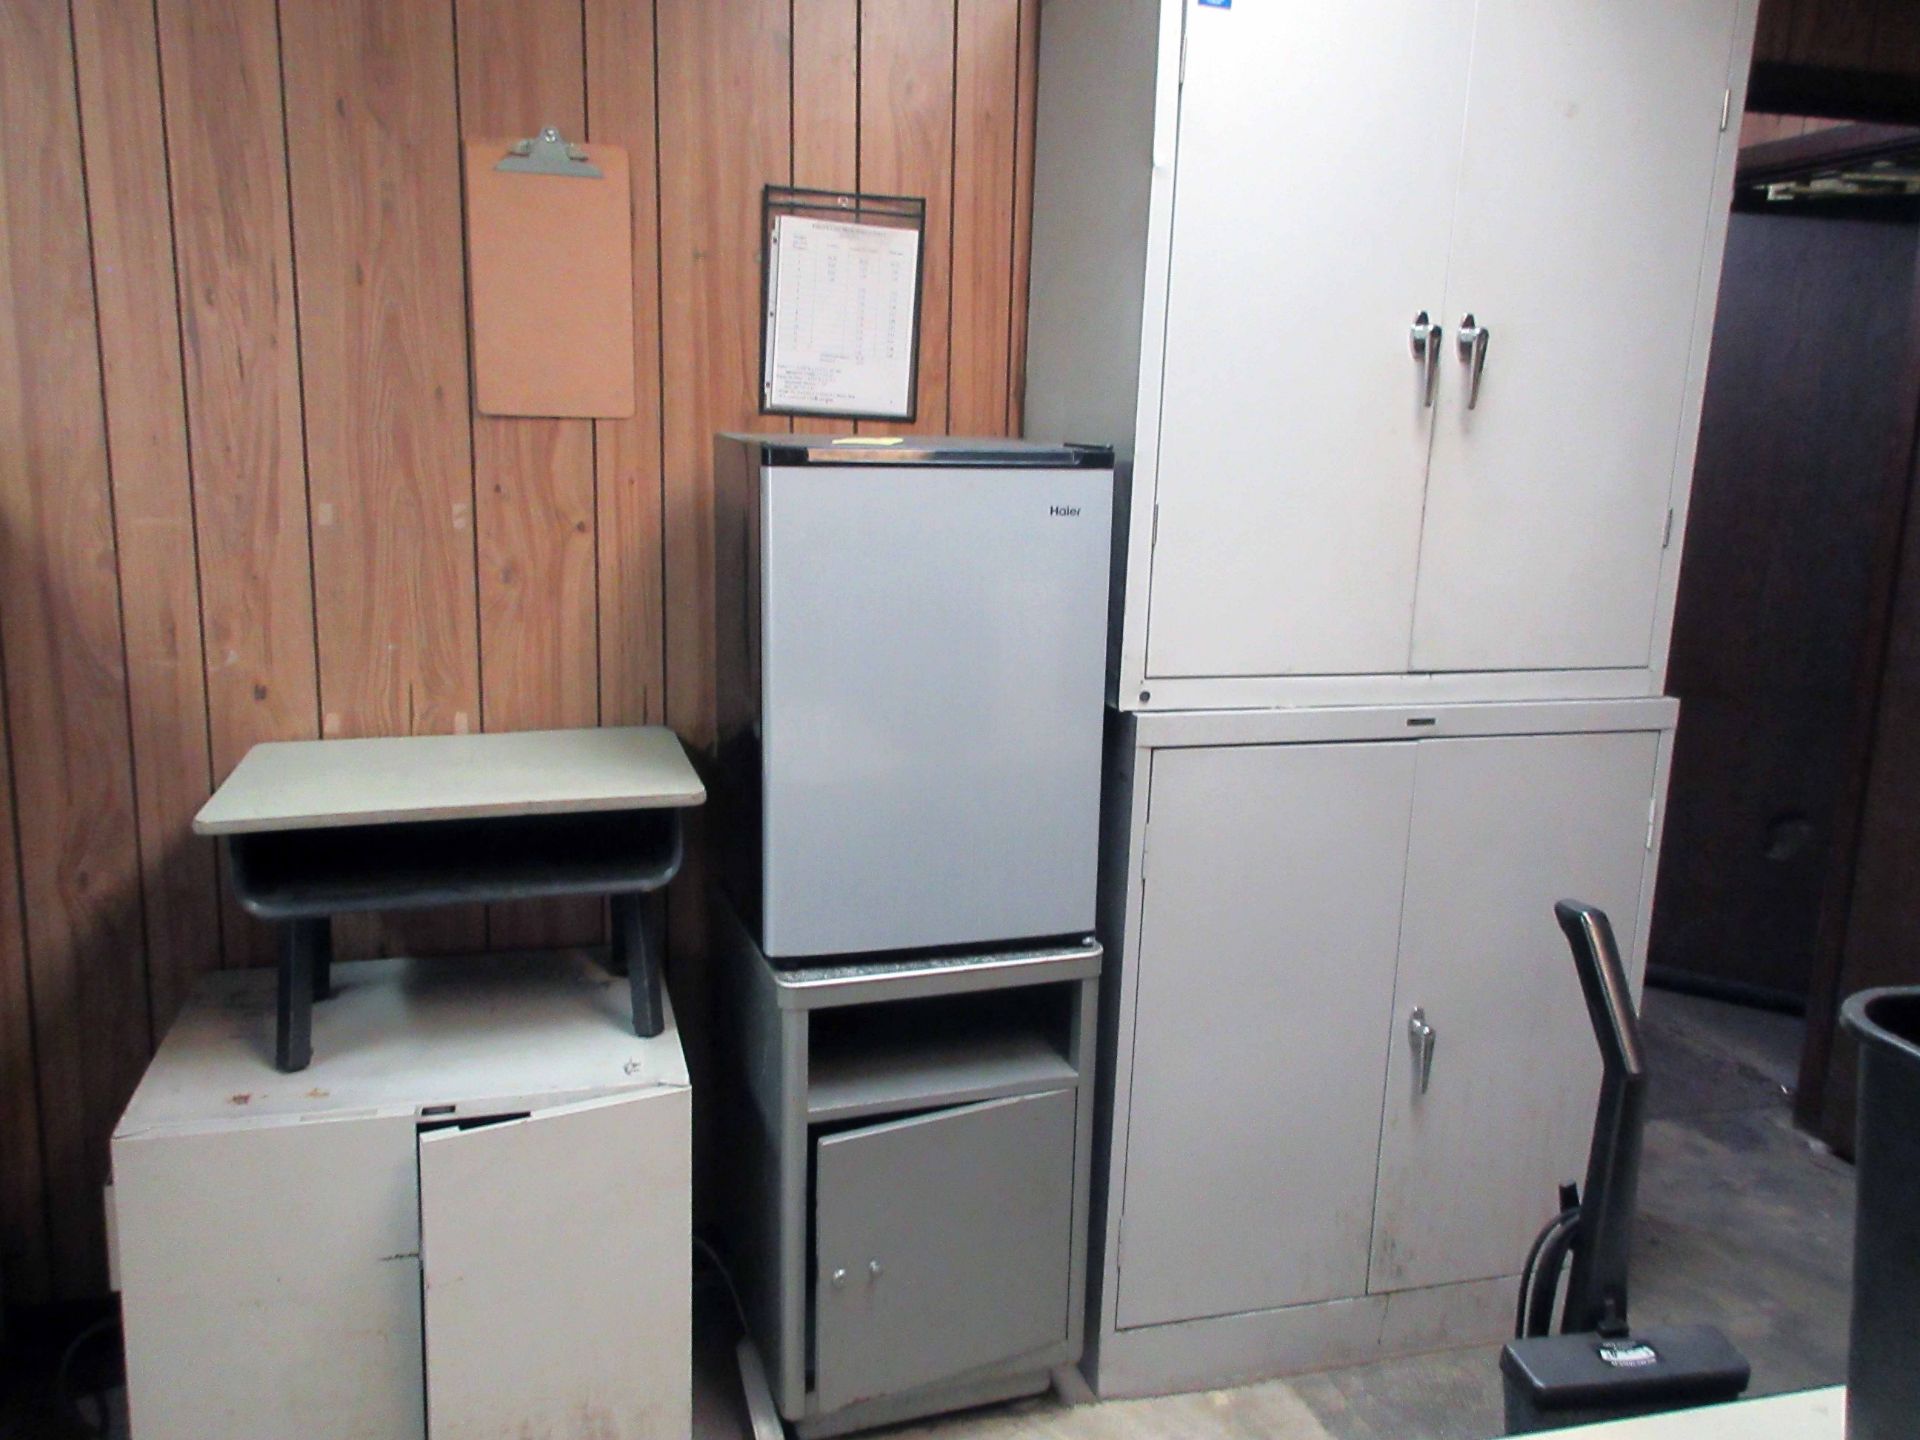 LOT CONSISTING OF: office furniture & supplies (mini fridge not included) - Image 2 of 6